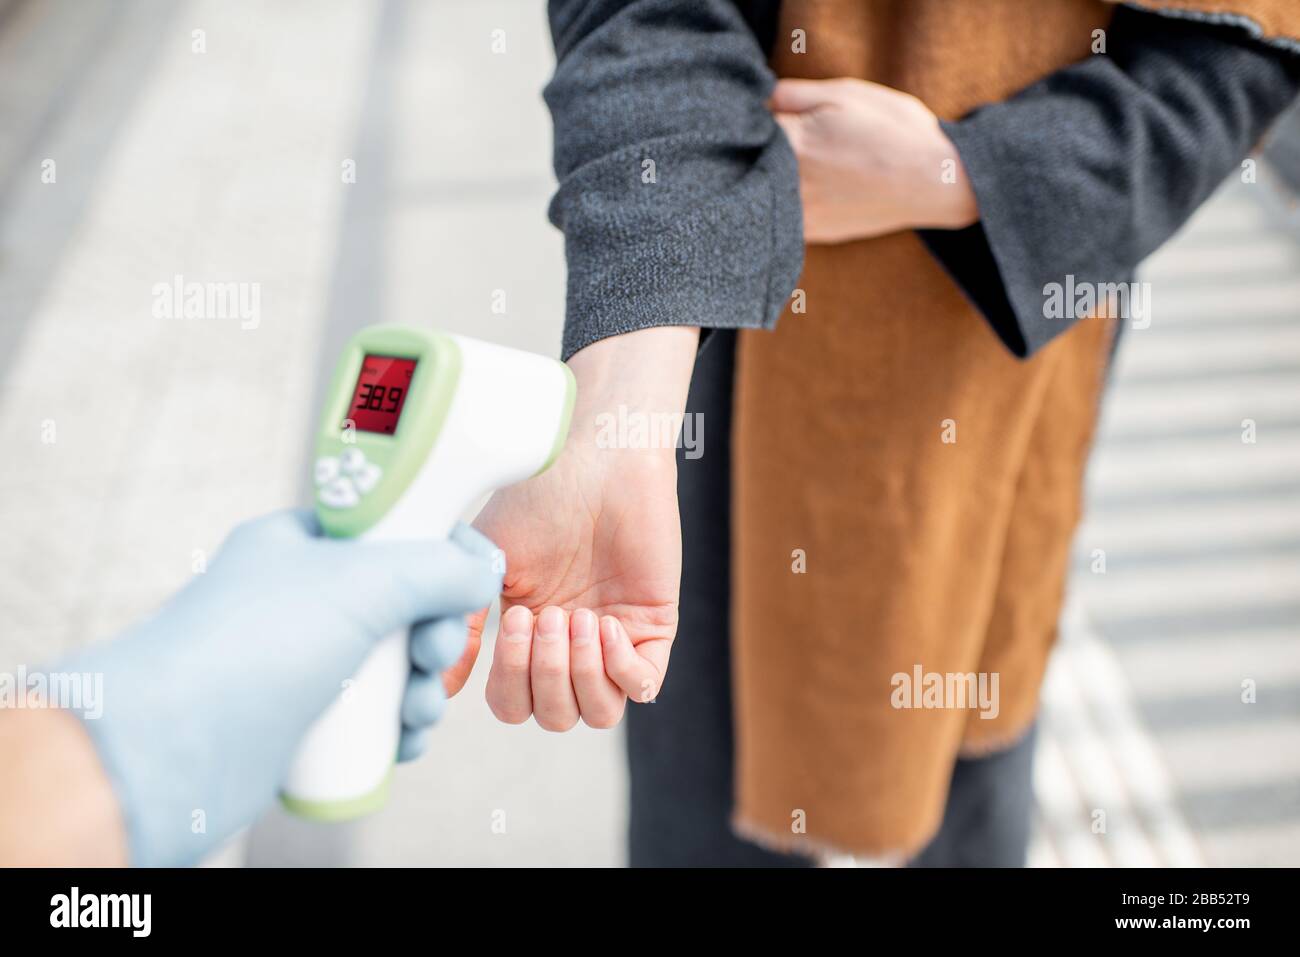 Measuring body temperature with infrared thermometer at a checkpoint during a virus outbreak, close-up on hand. Concept of prevention the spread of the virus Stock Photo